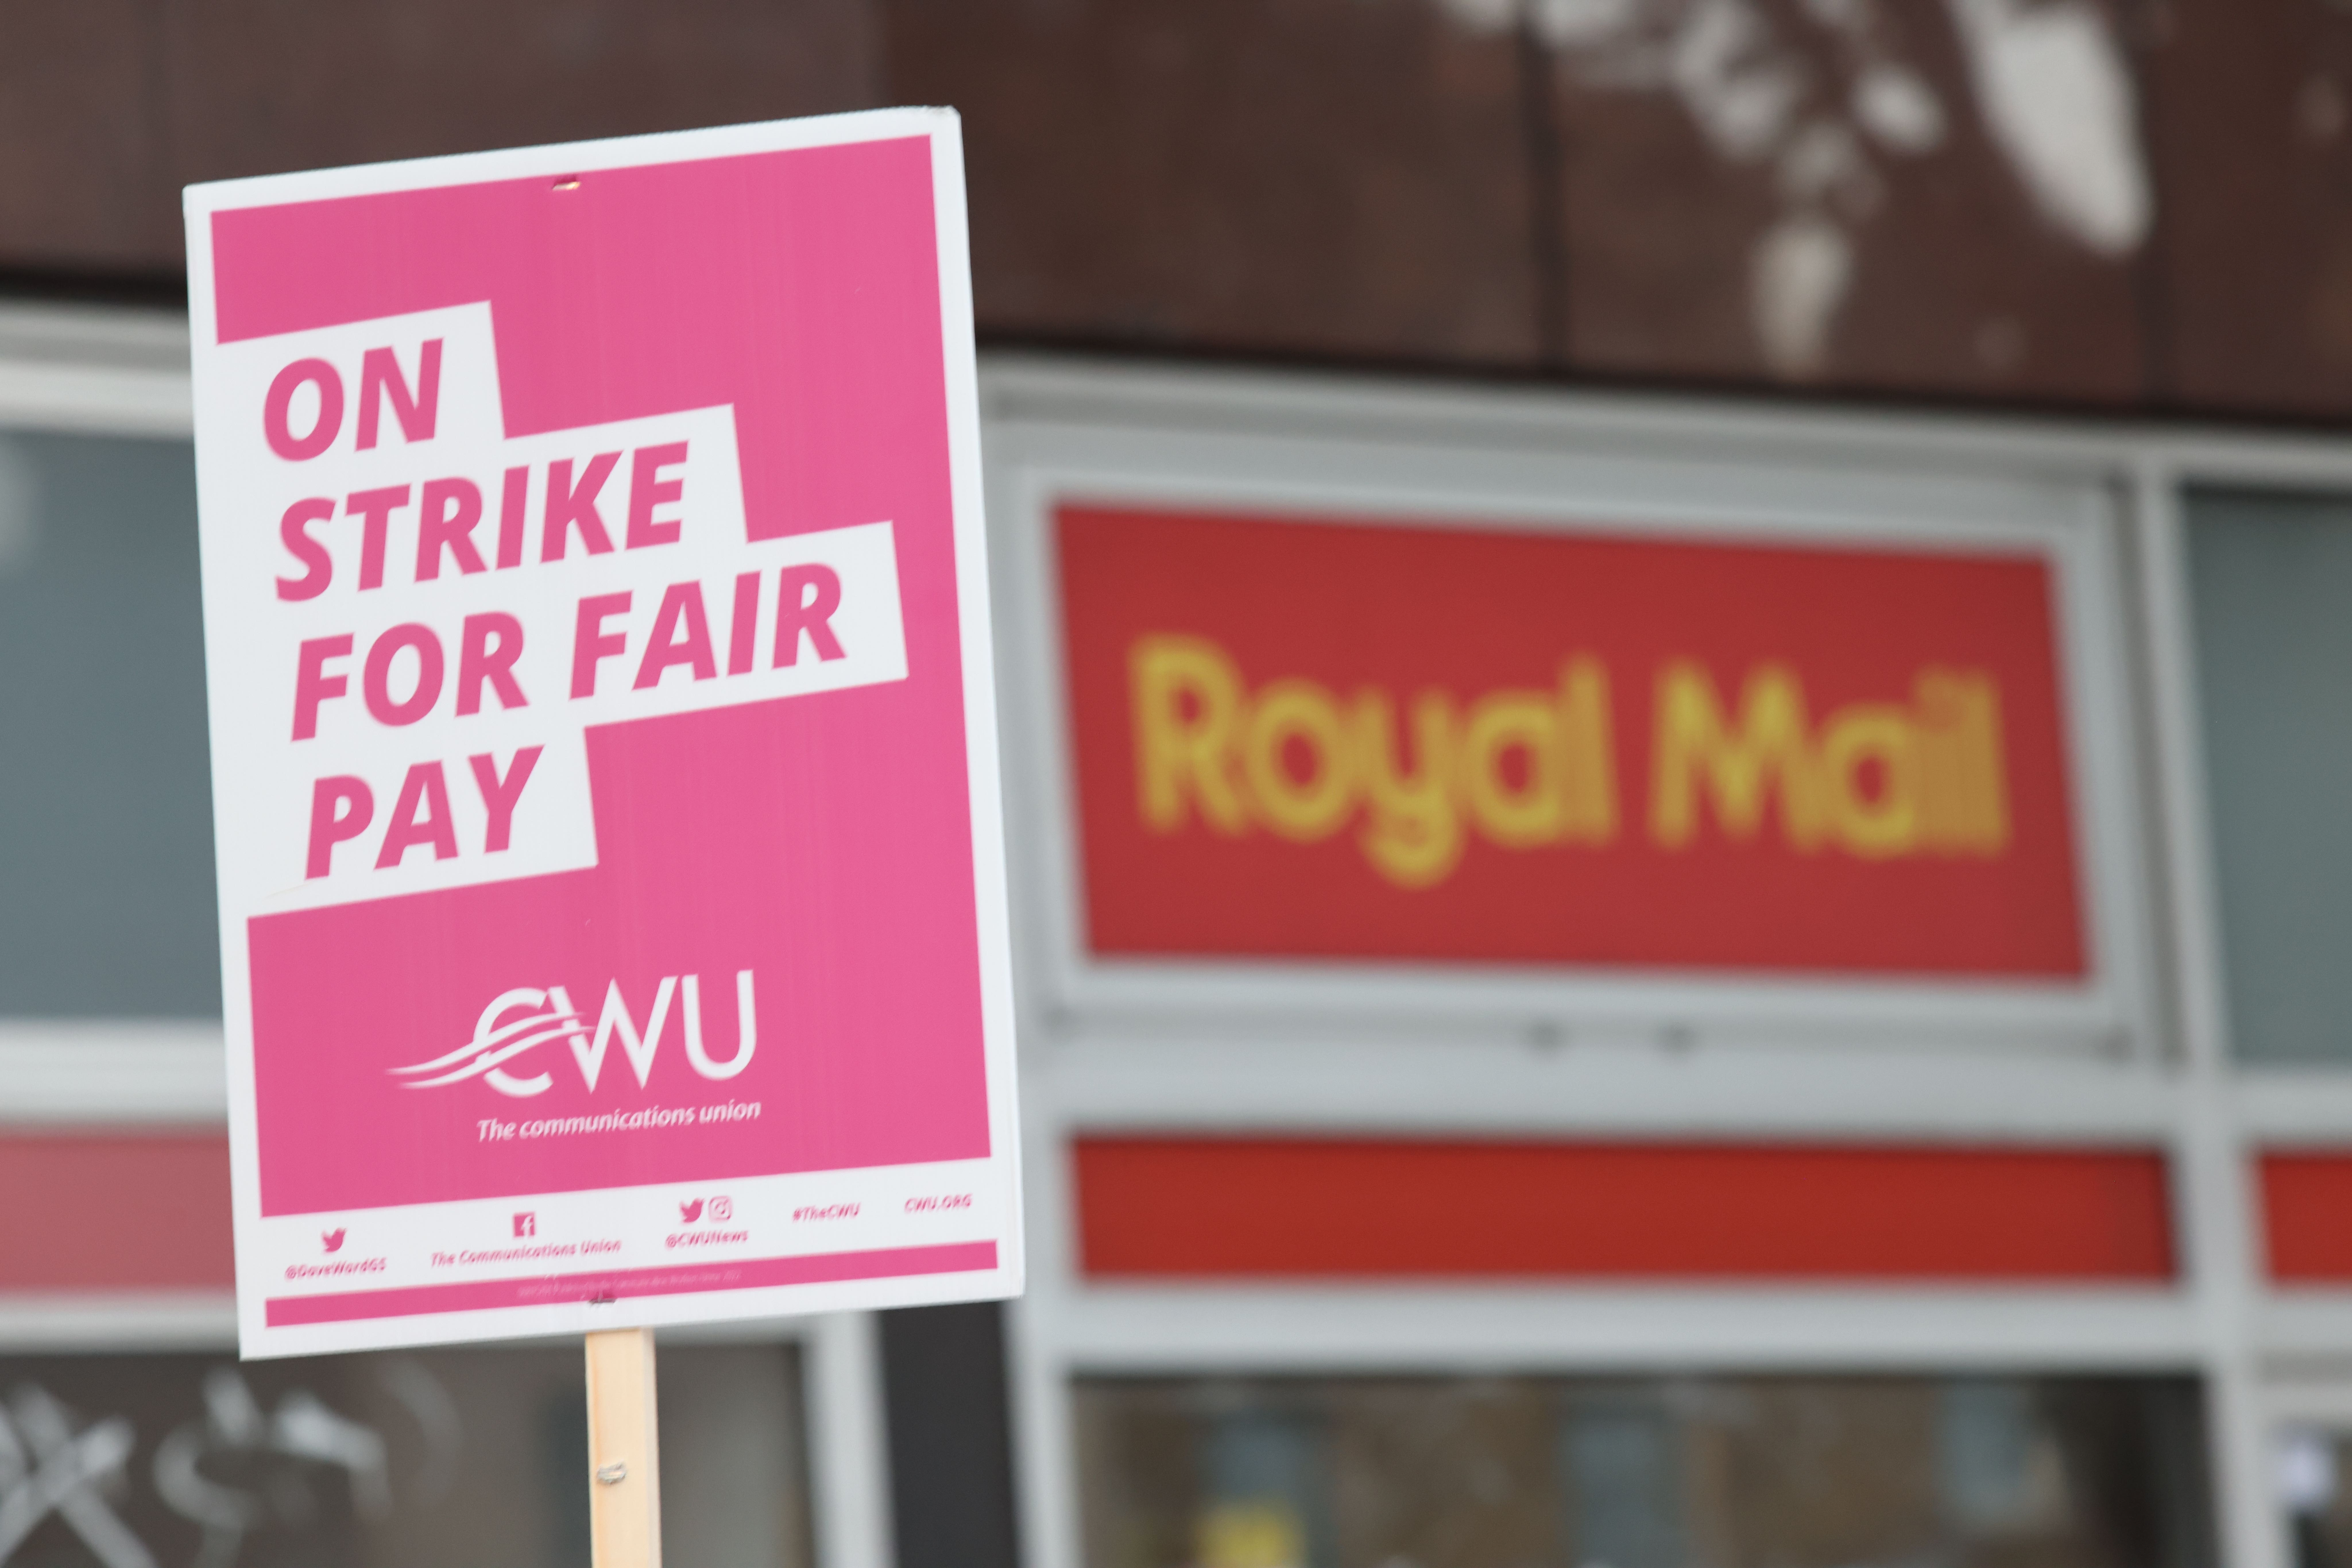 Red-carded: Royal Mail strikes have hit Moonpig’s business